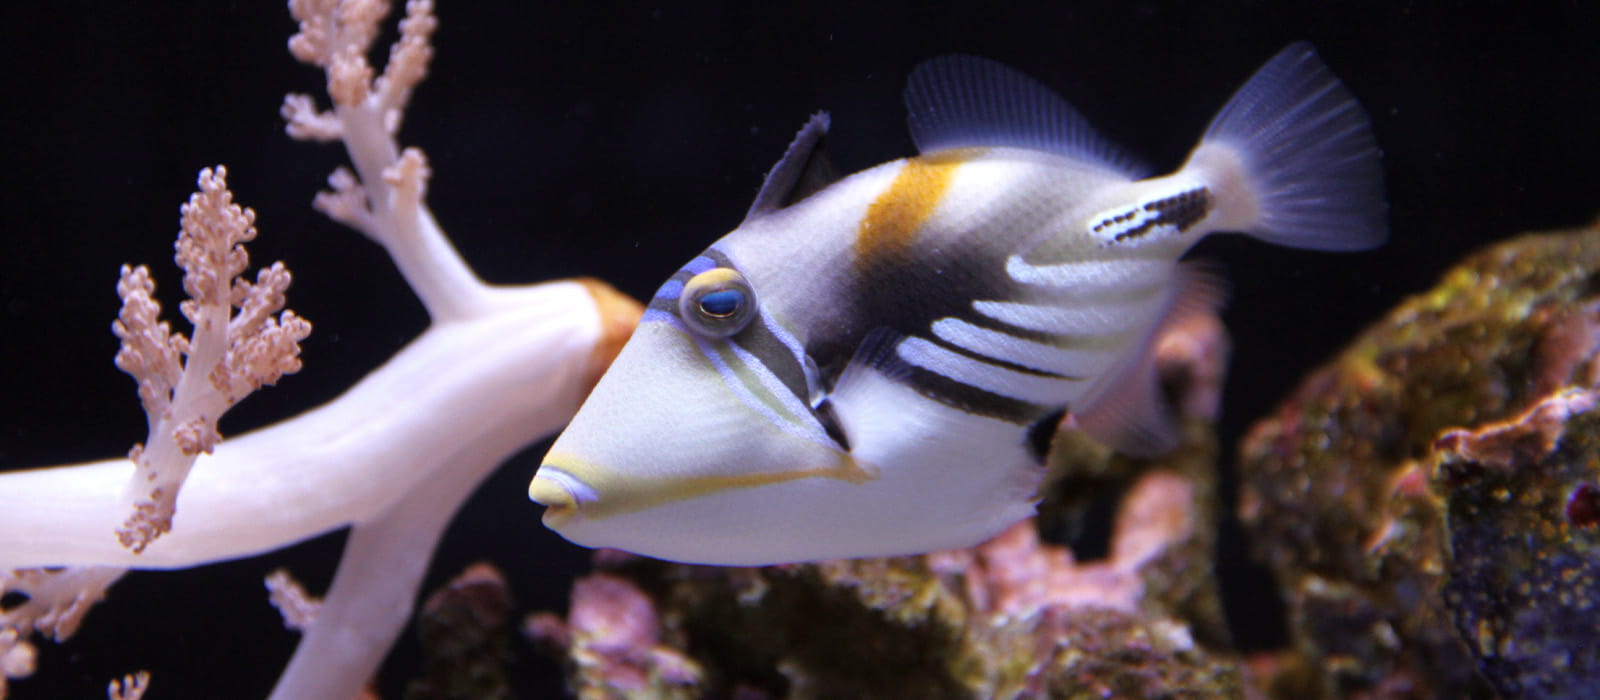 Picasso triggerfish swimming in its habitat near some coral.